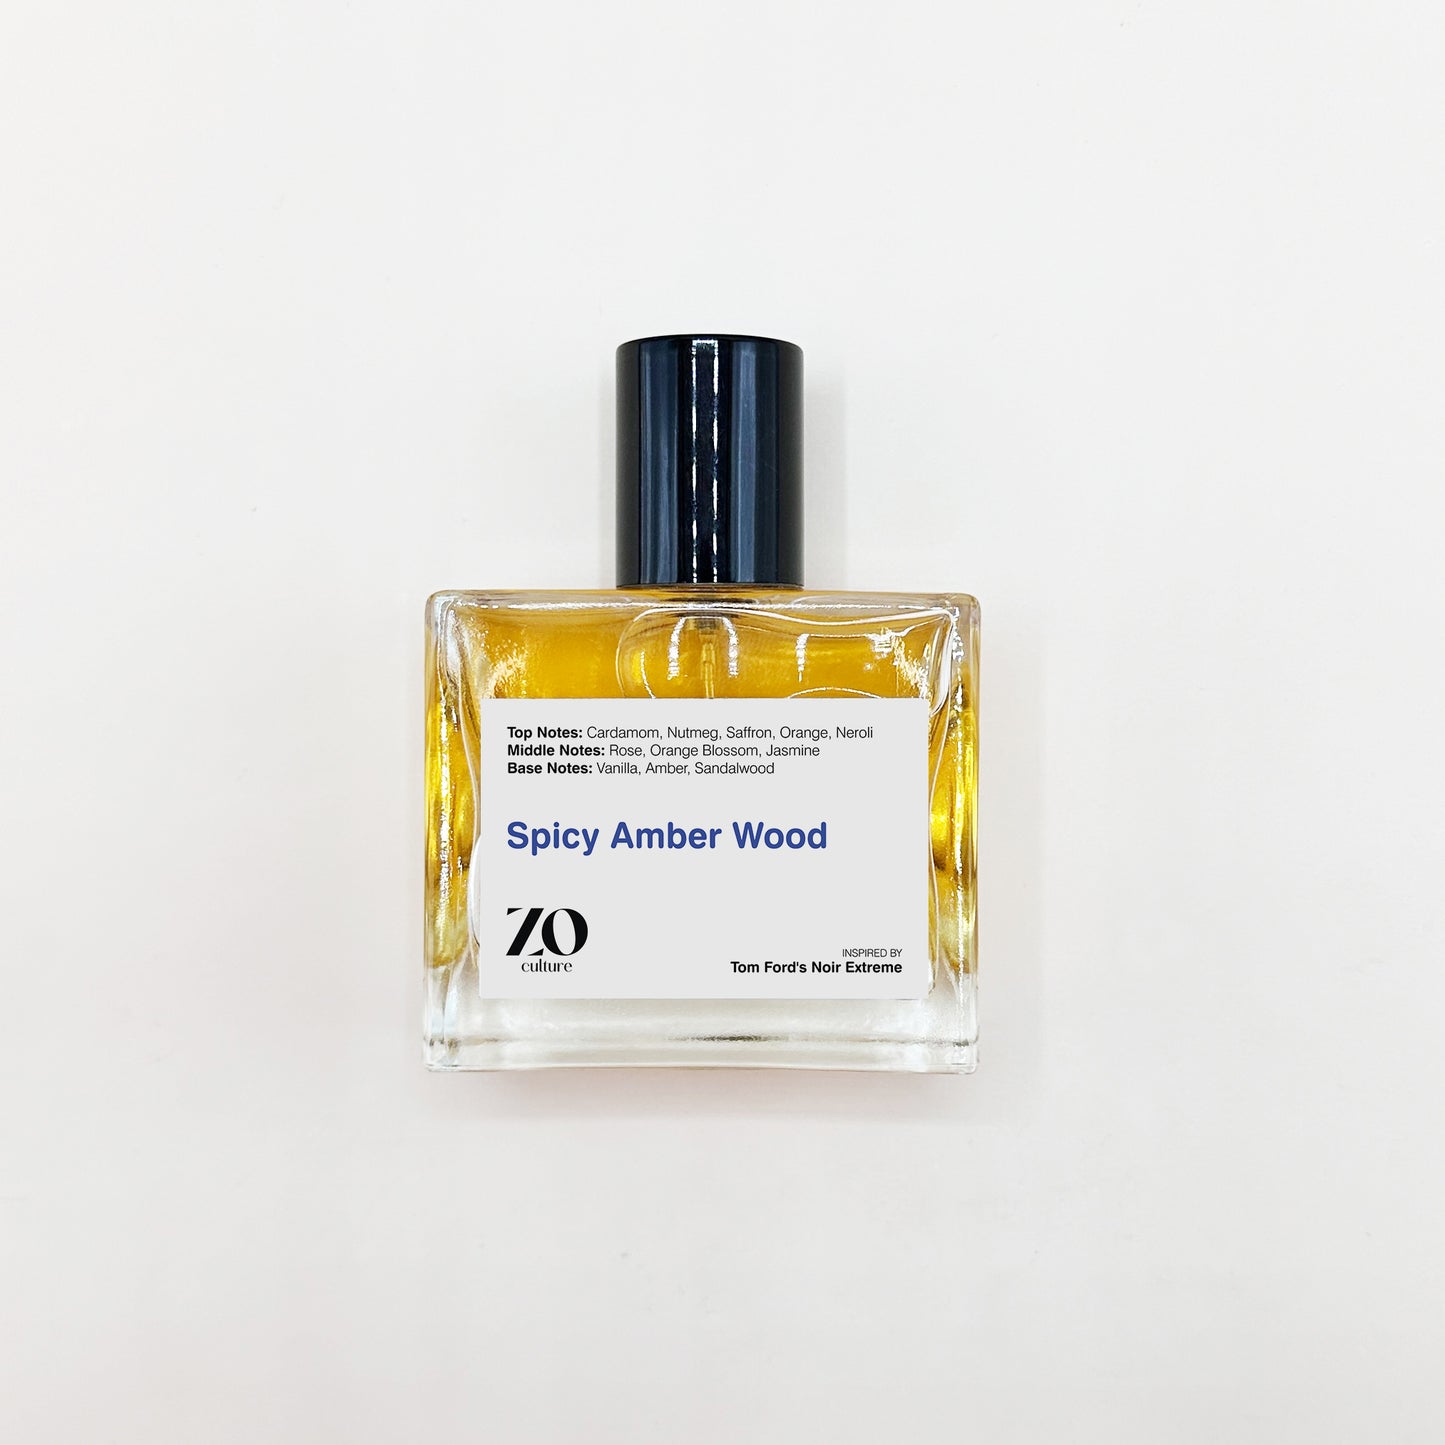 Men Perfume Spicy Amber Wood - Inspired by Noir Extreme ZoCulture